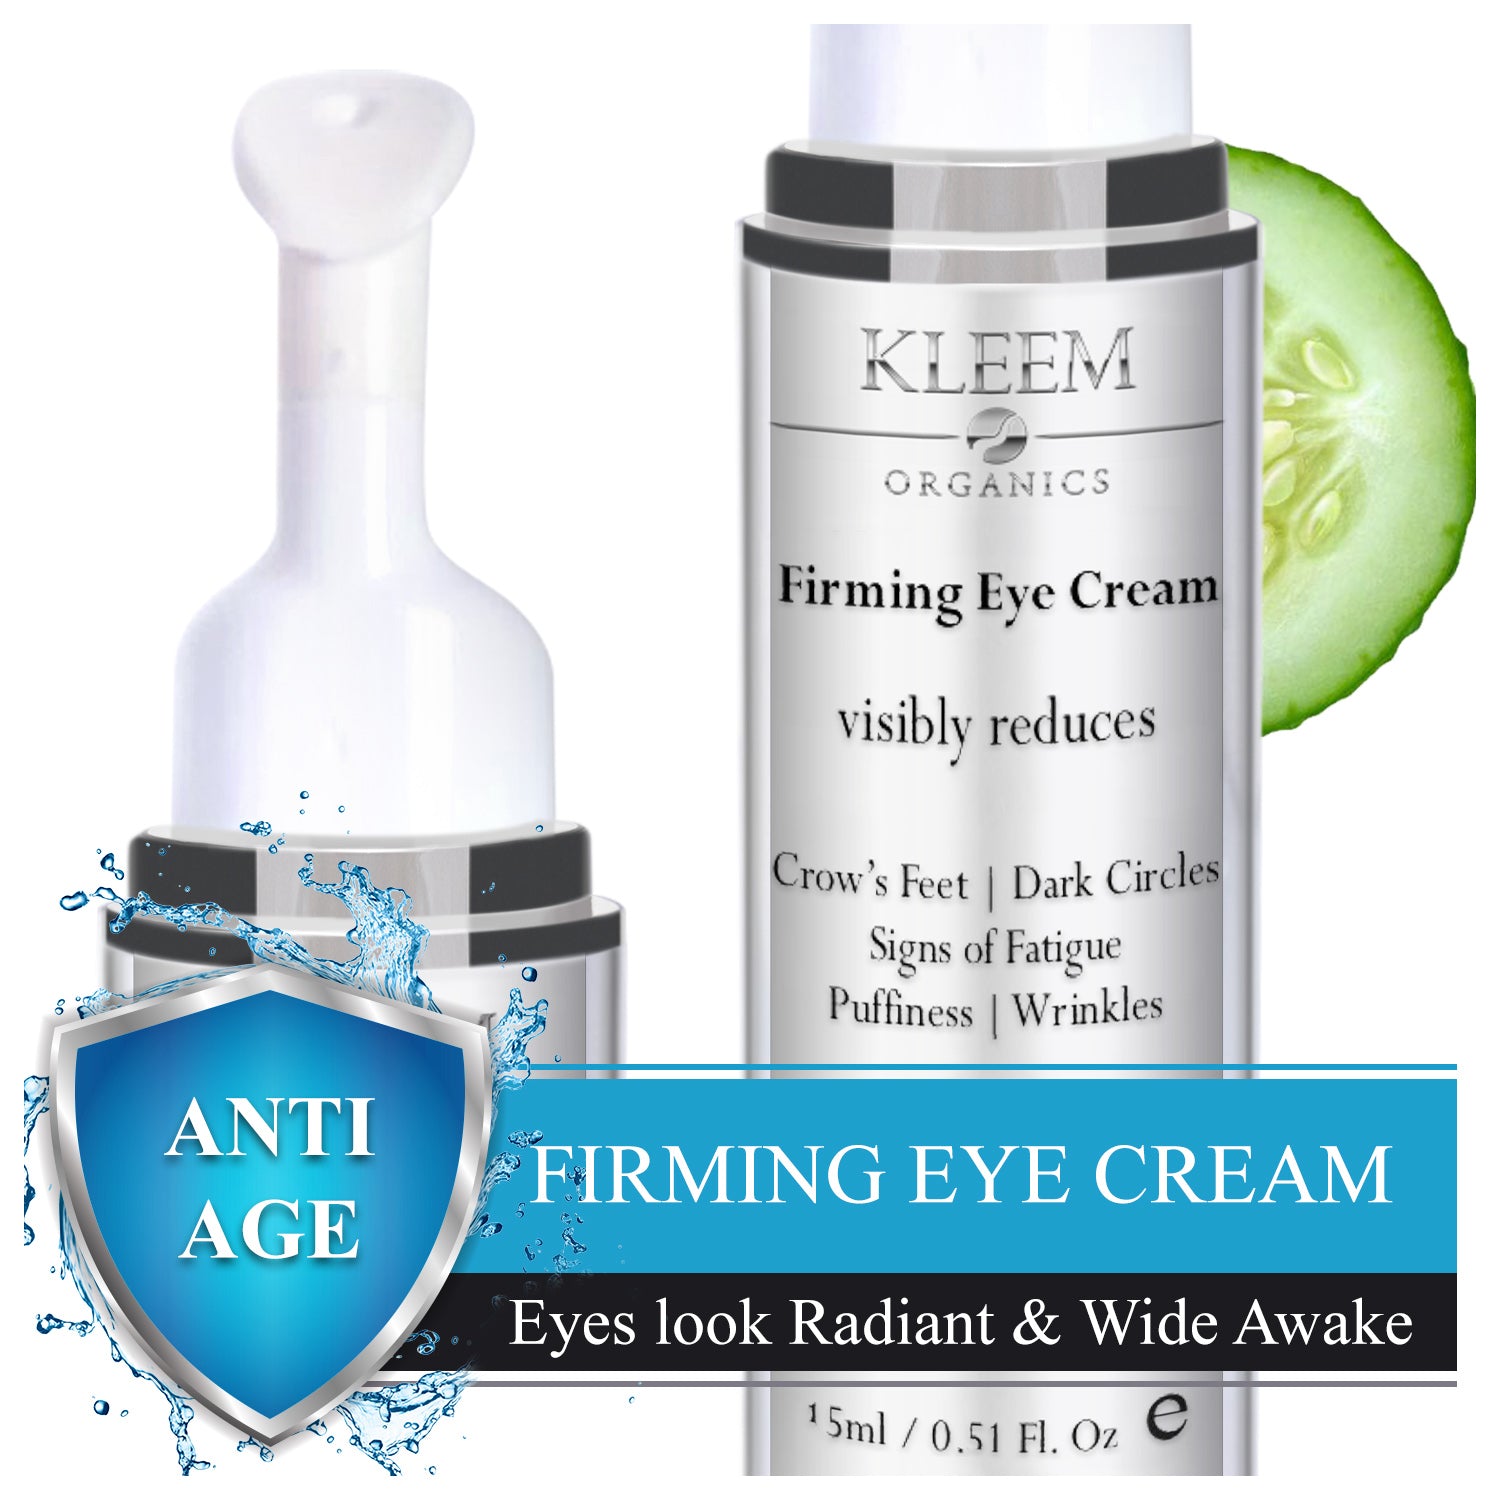 Anti Aging Eye Cream for Dark Circles and Puffiness that Reduces Eye Bags, Crow's Feet, Fine Lines, and Sagginess in JUST 6 WEEKS. The Most Effective Under Eye Cream for Wrinkles (0.51 fl.oz) 0.51 Fl Oz (Pack of 1)